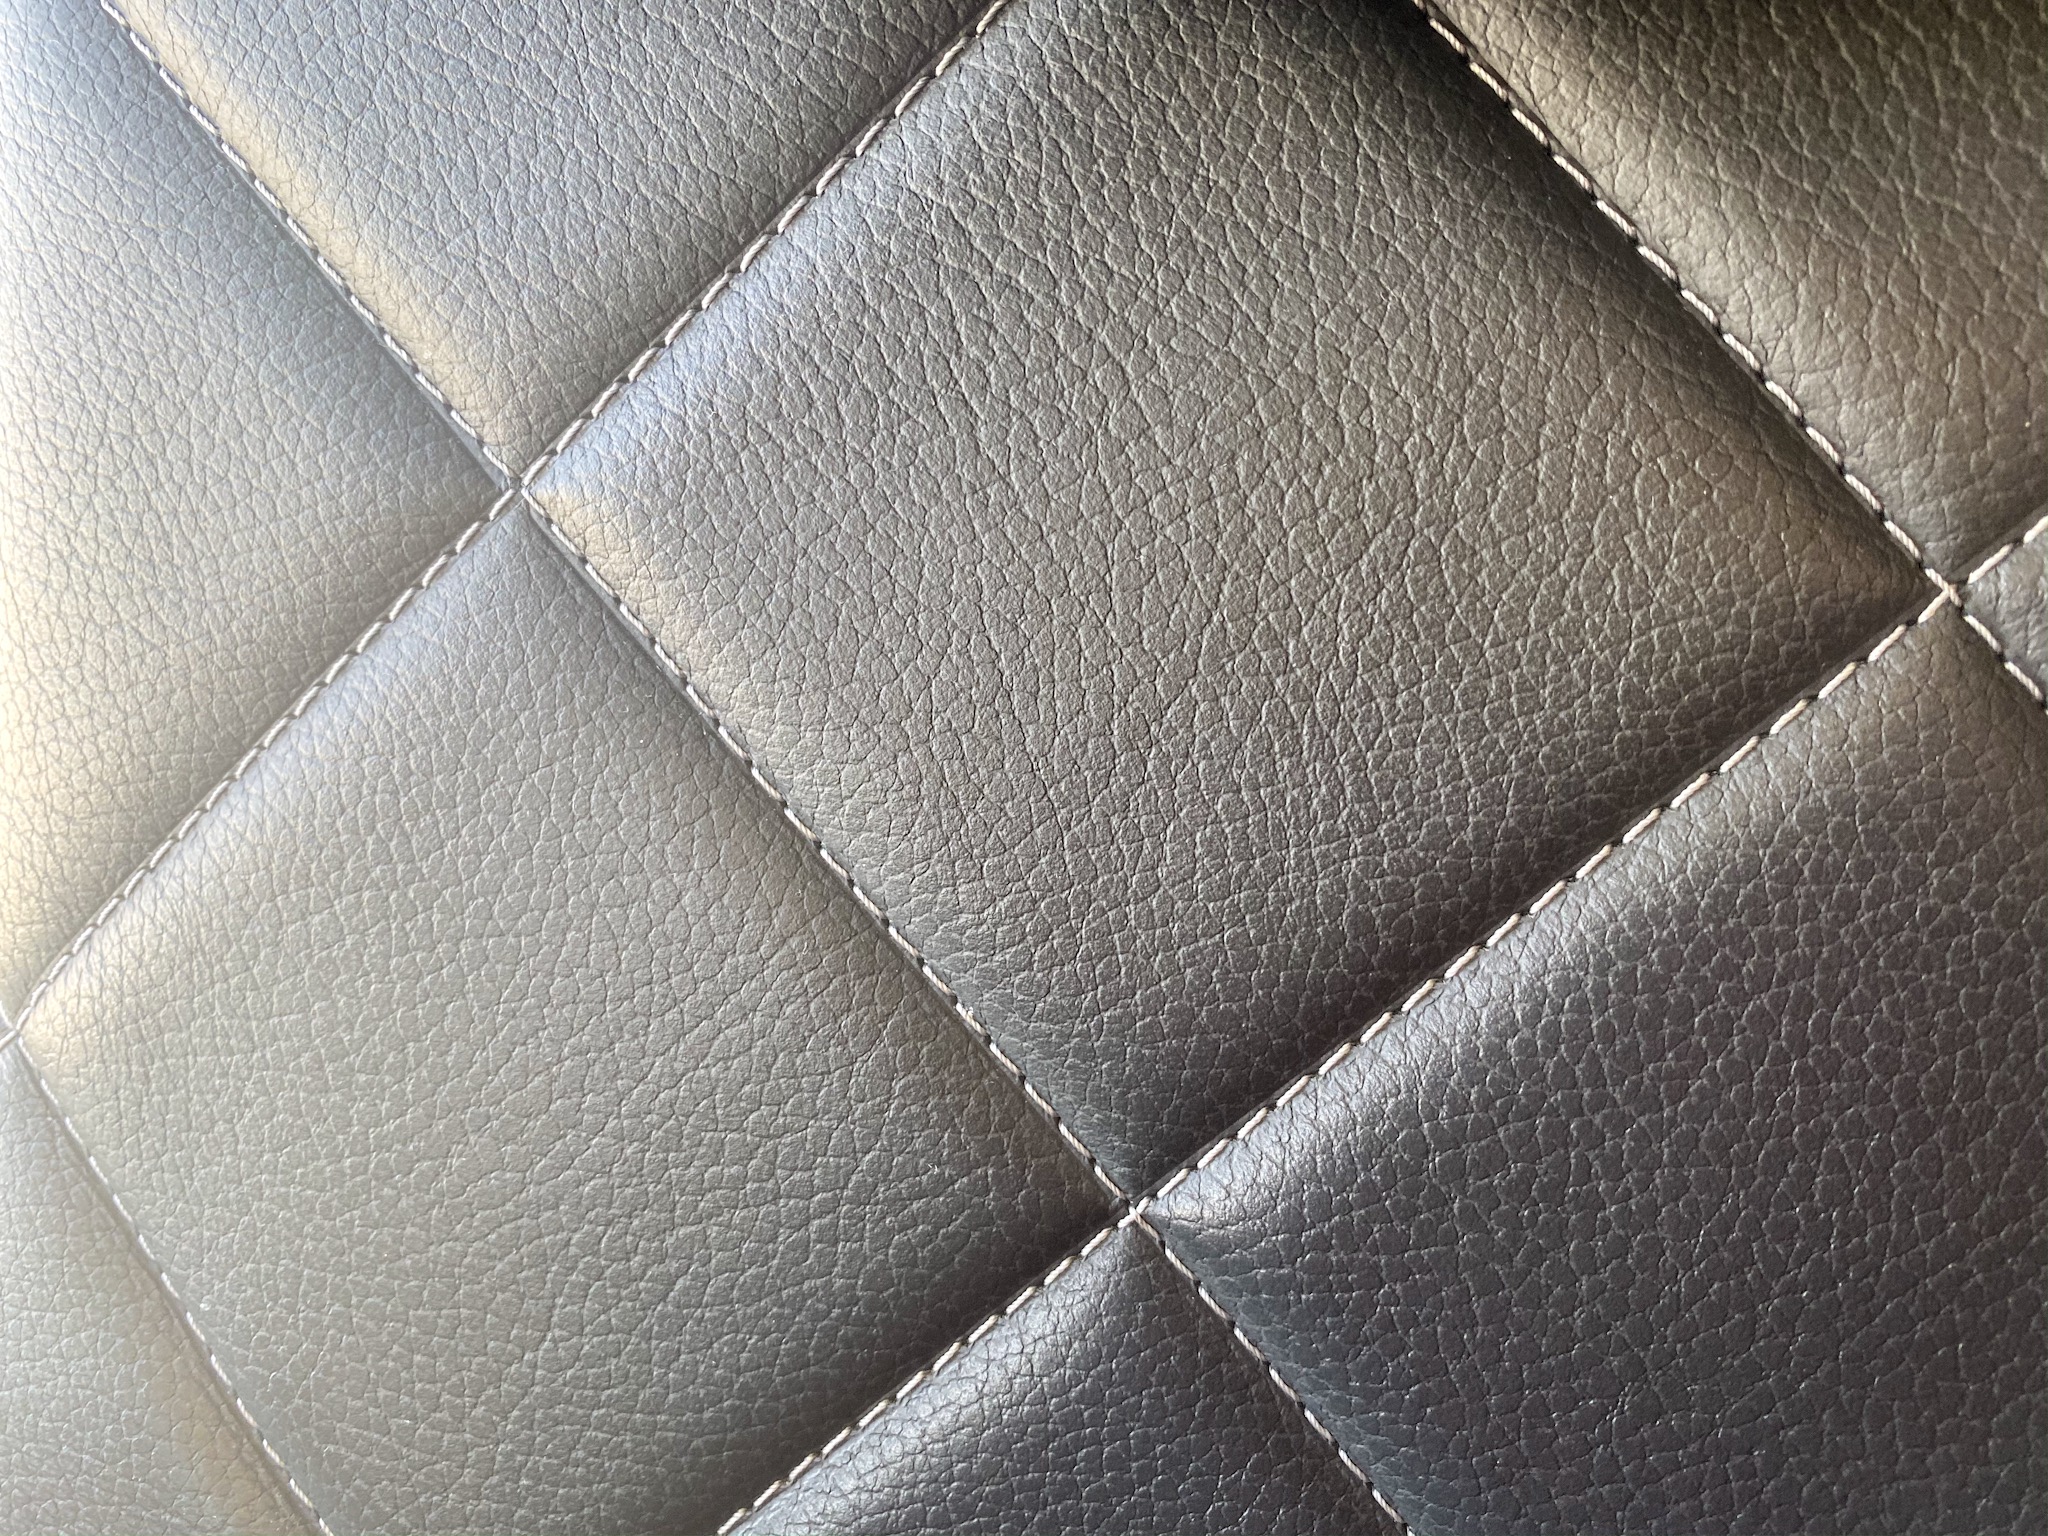 a close up of a black leather surface